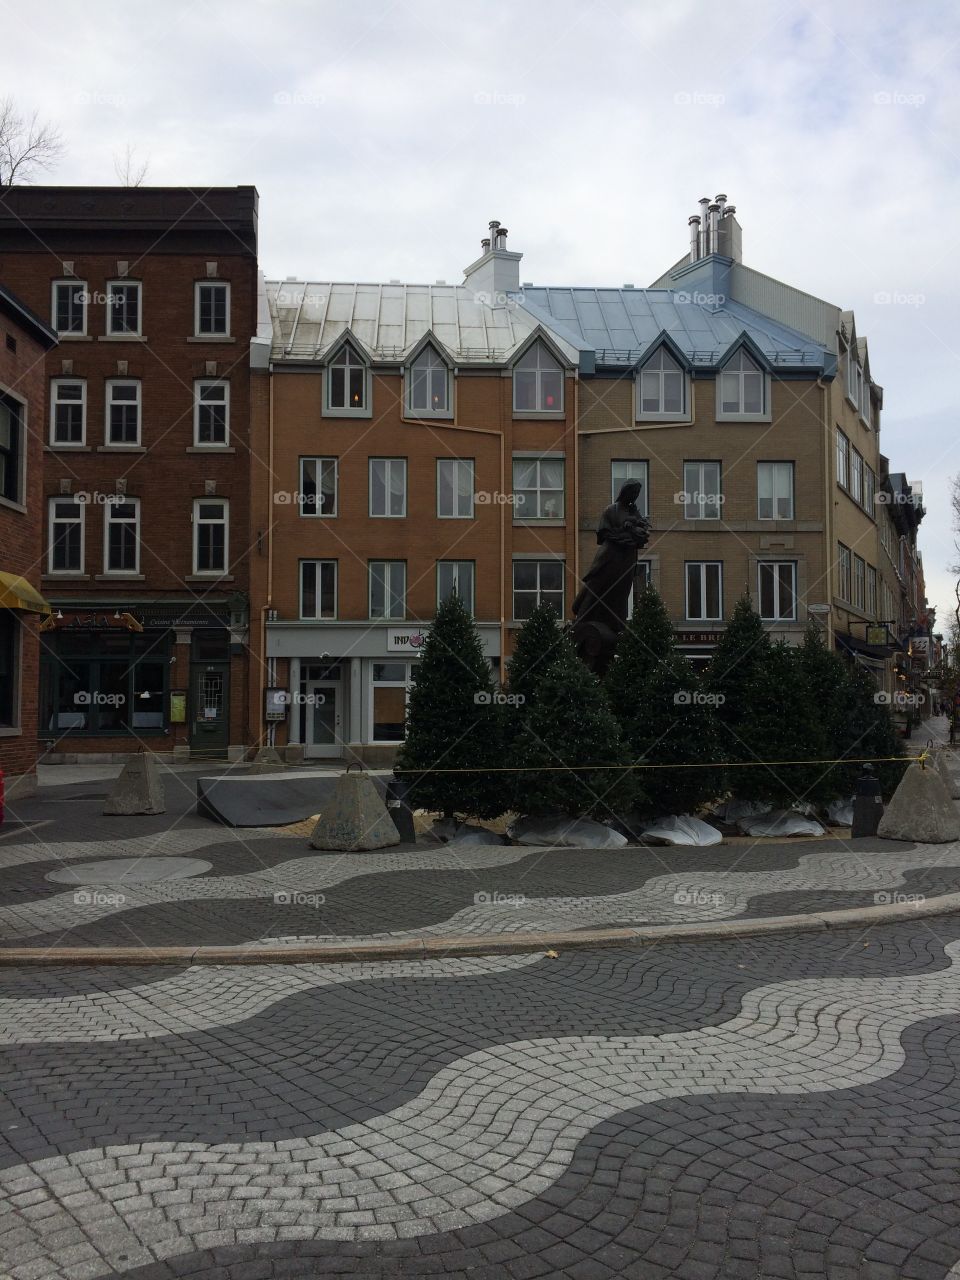 Cobblestone streets and Christmas decorations in Old Town Quebec 